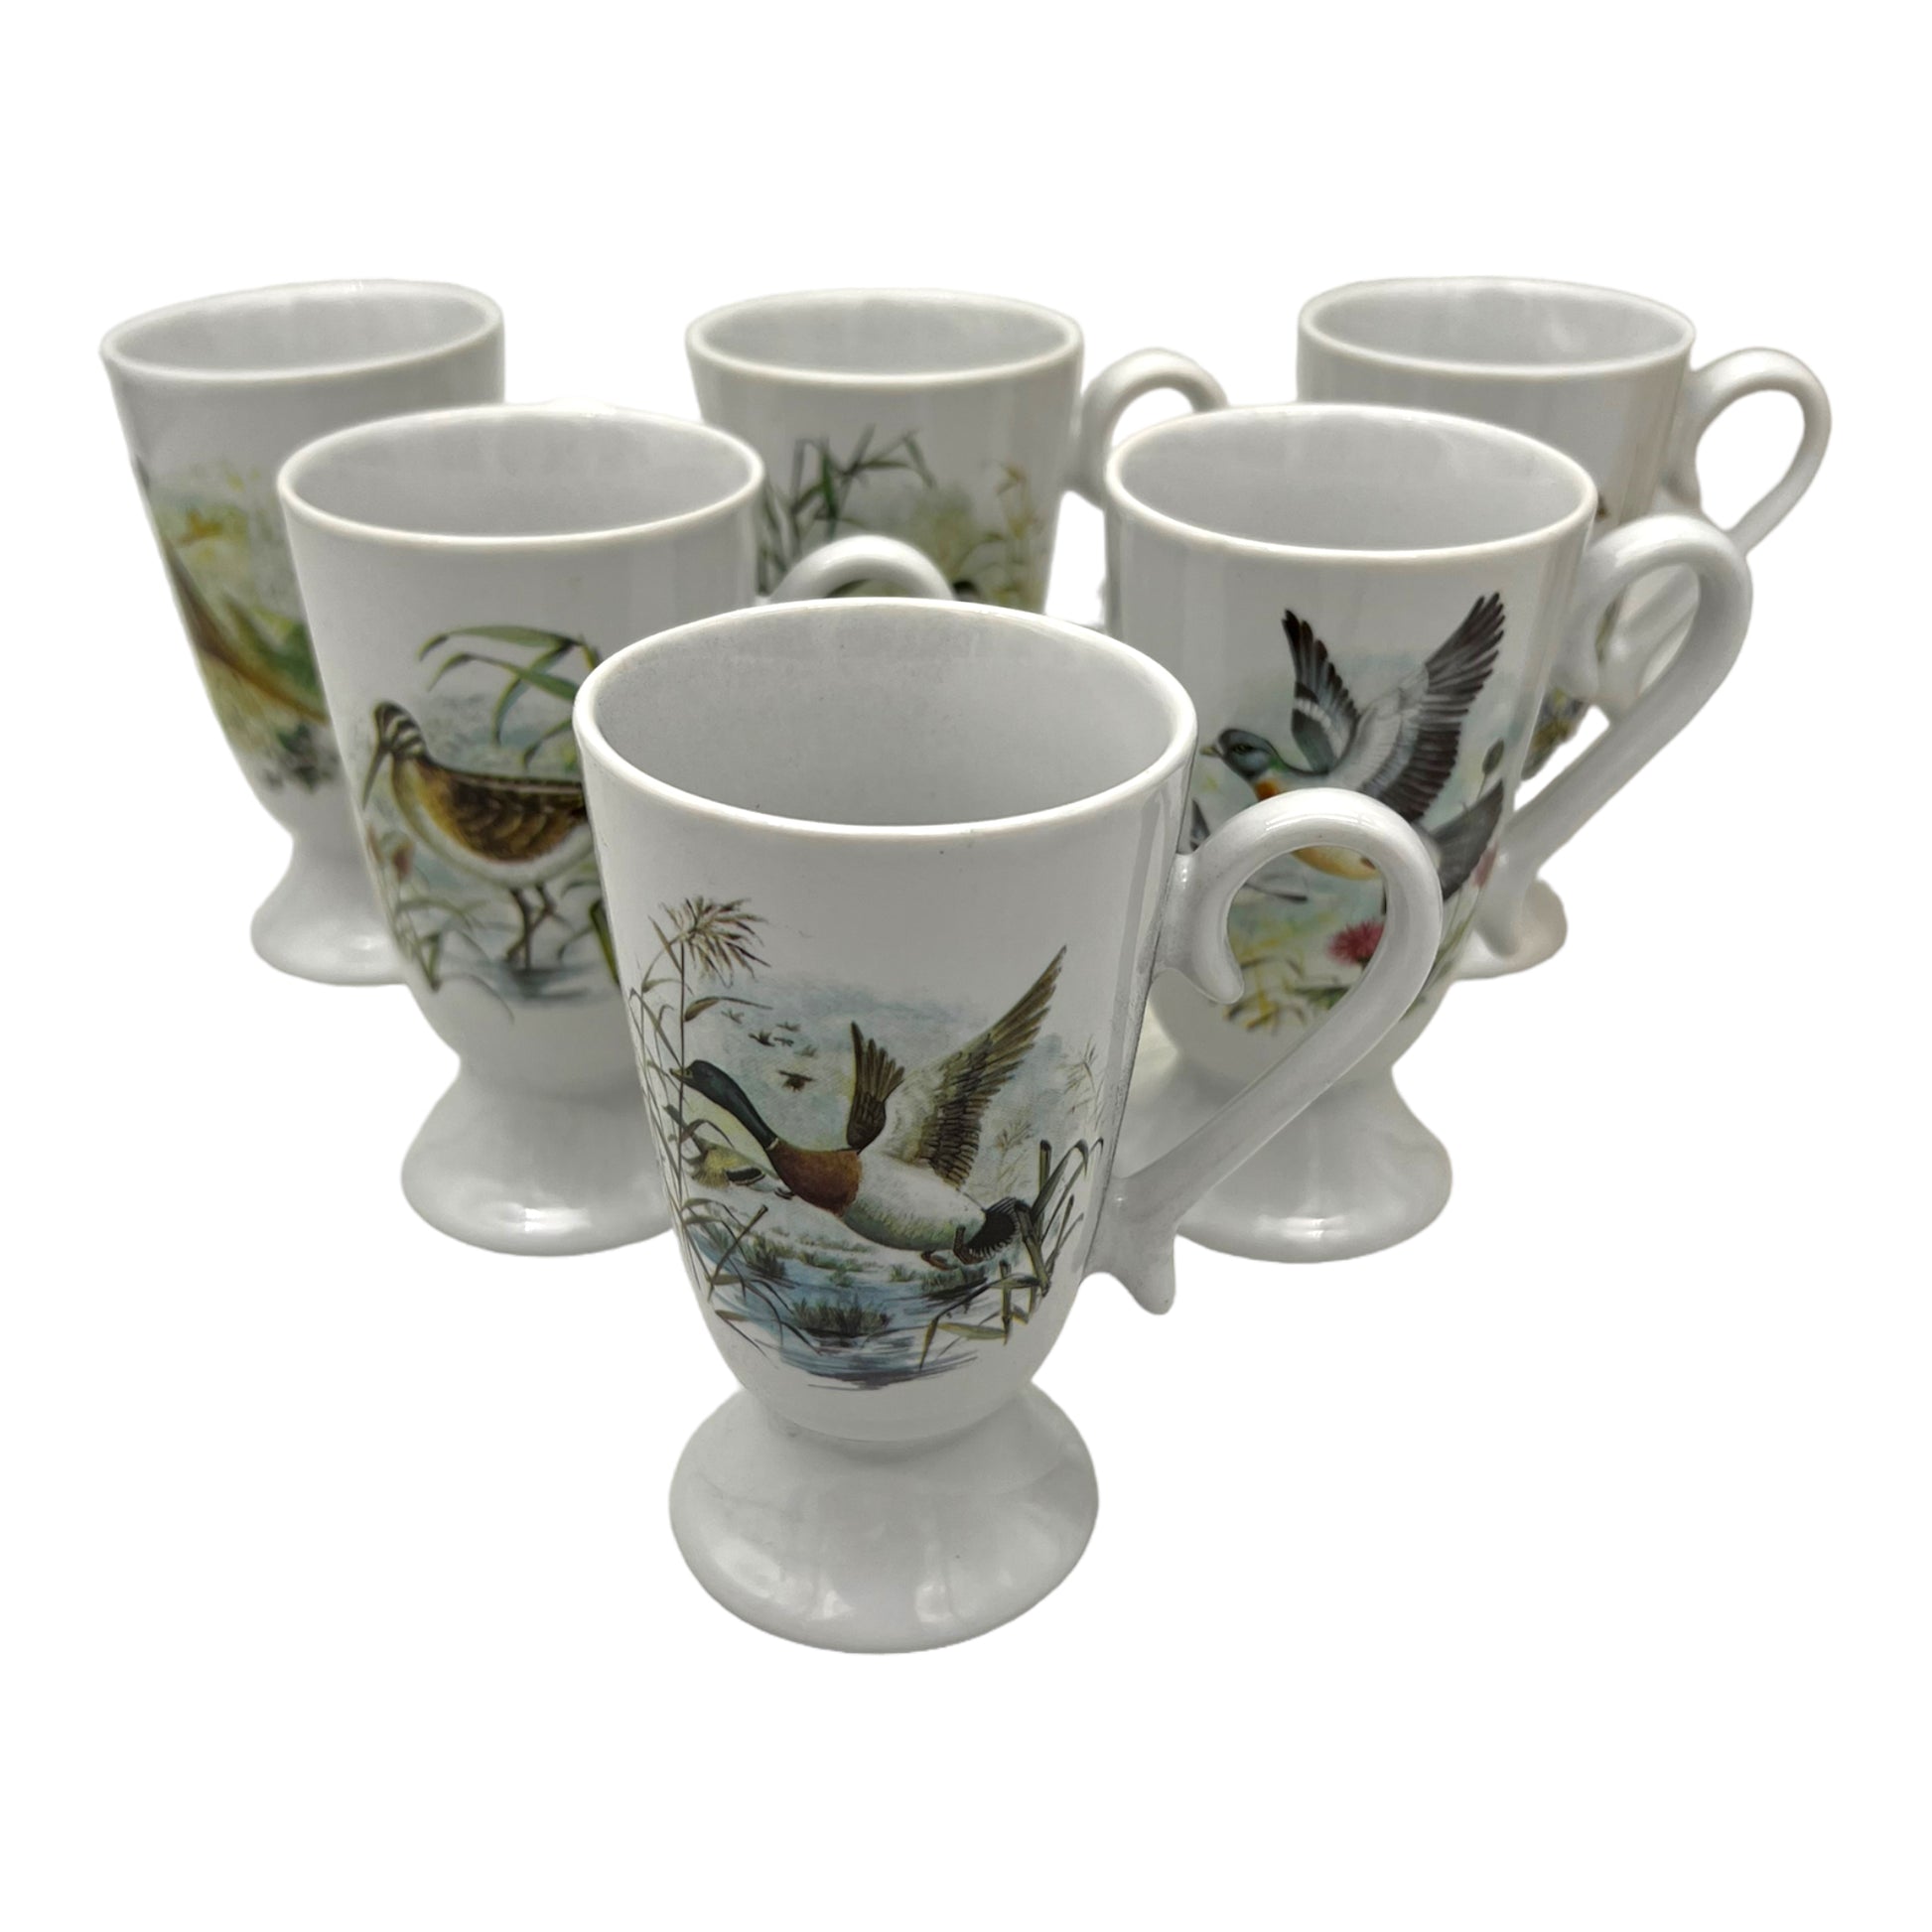 French Mazagran cups sold by All Things French Store